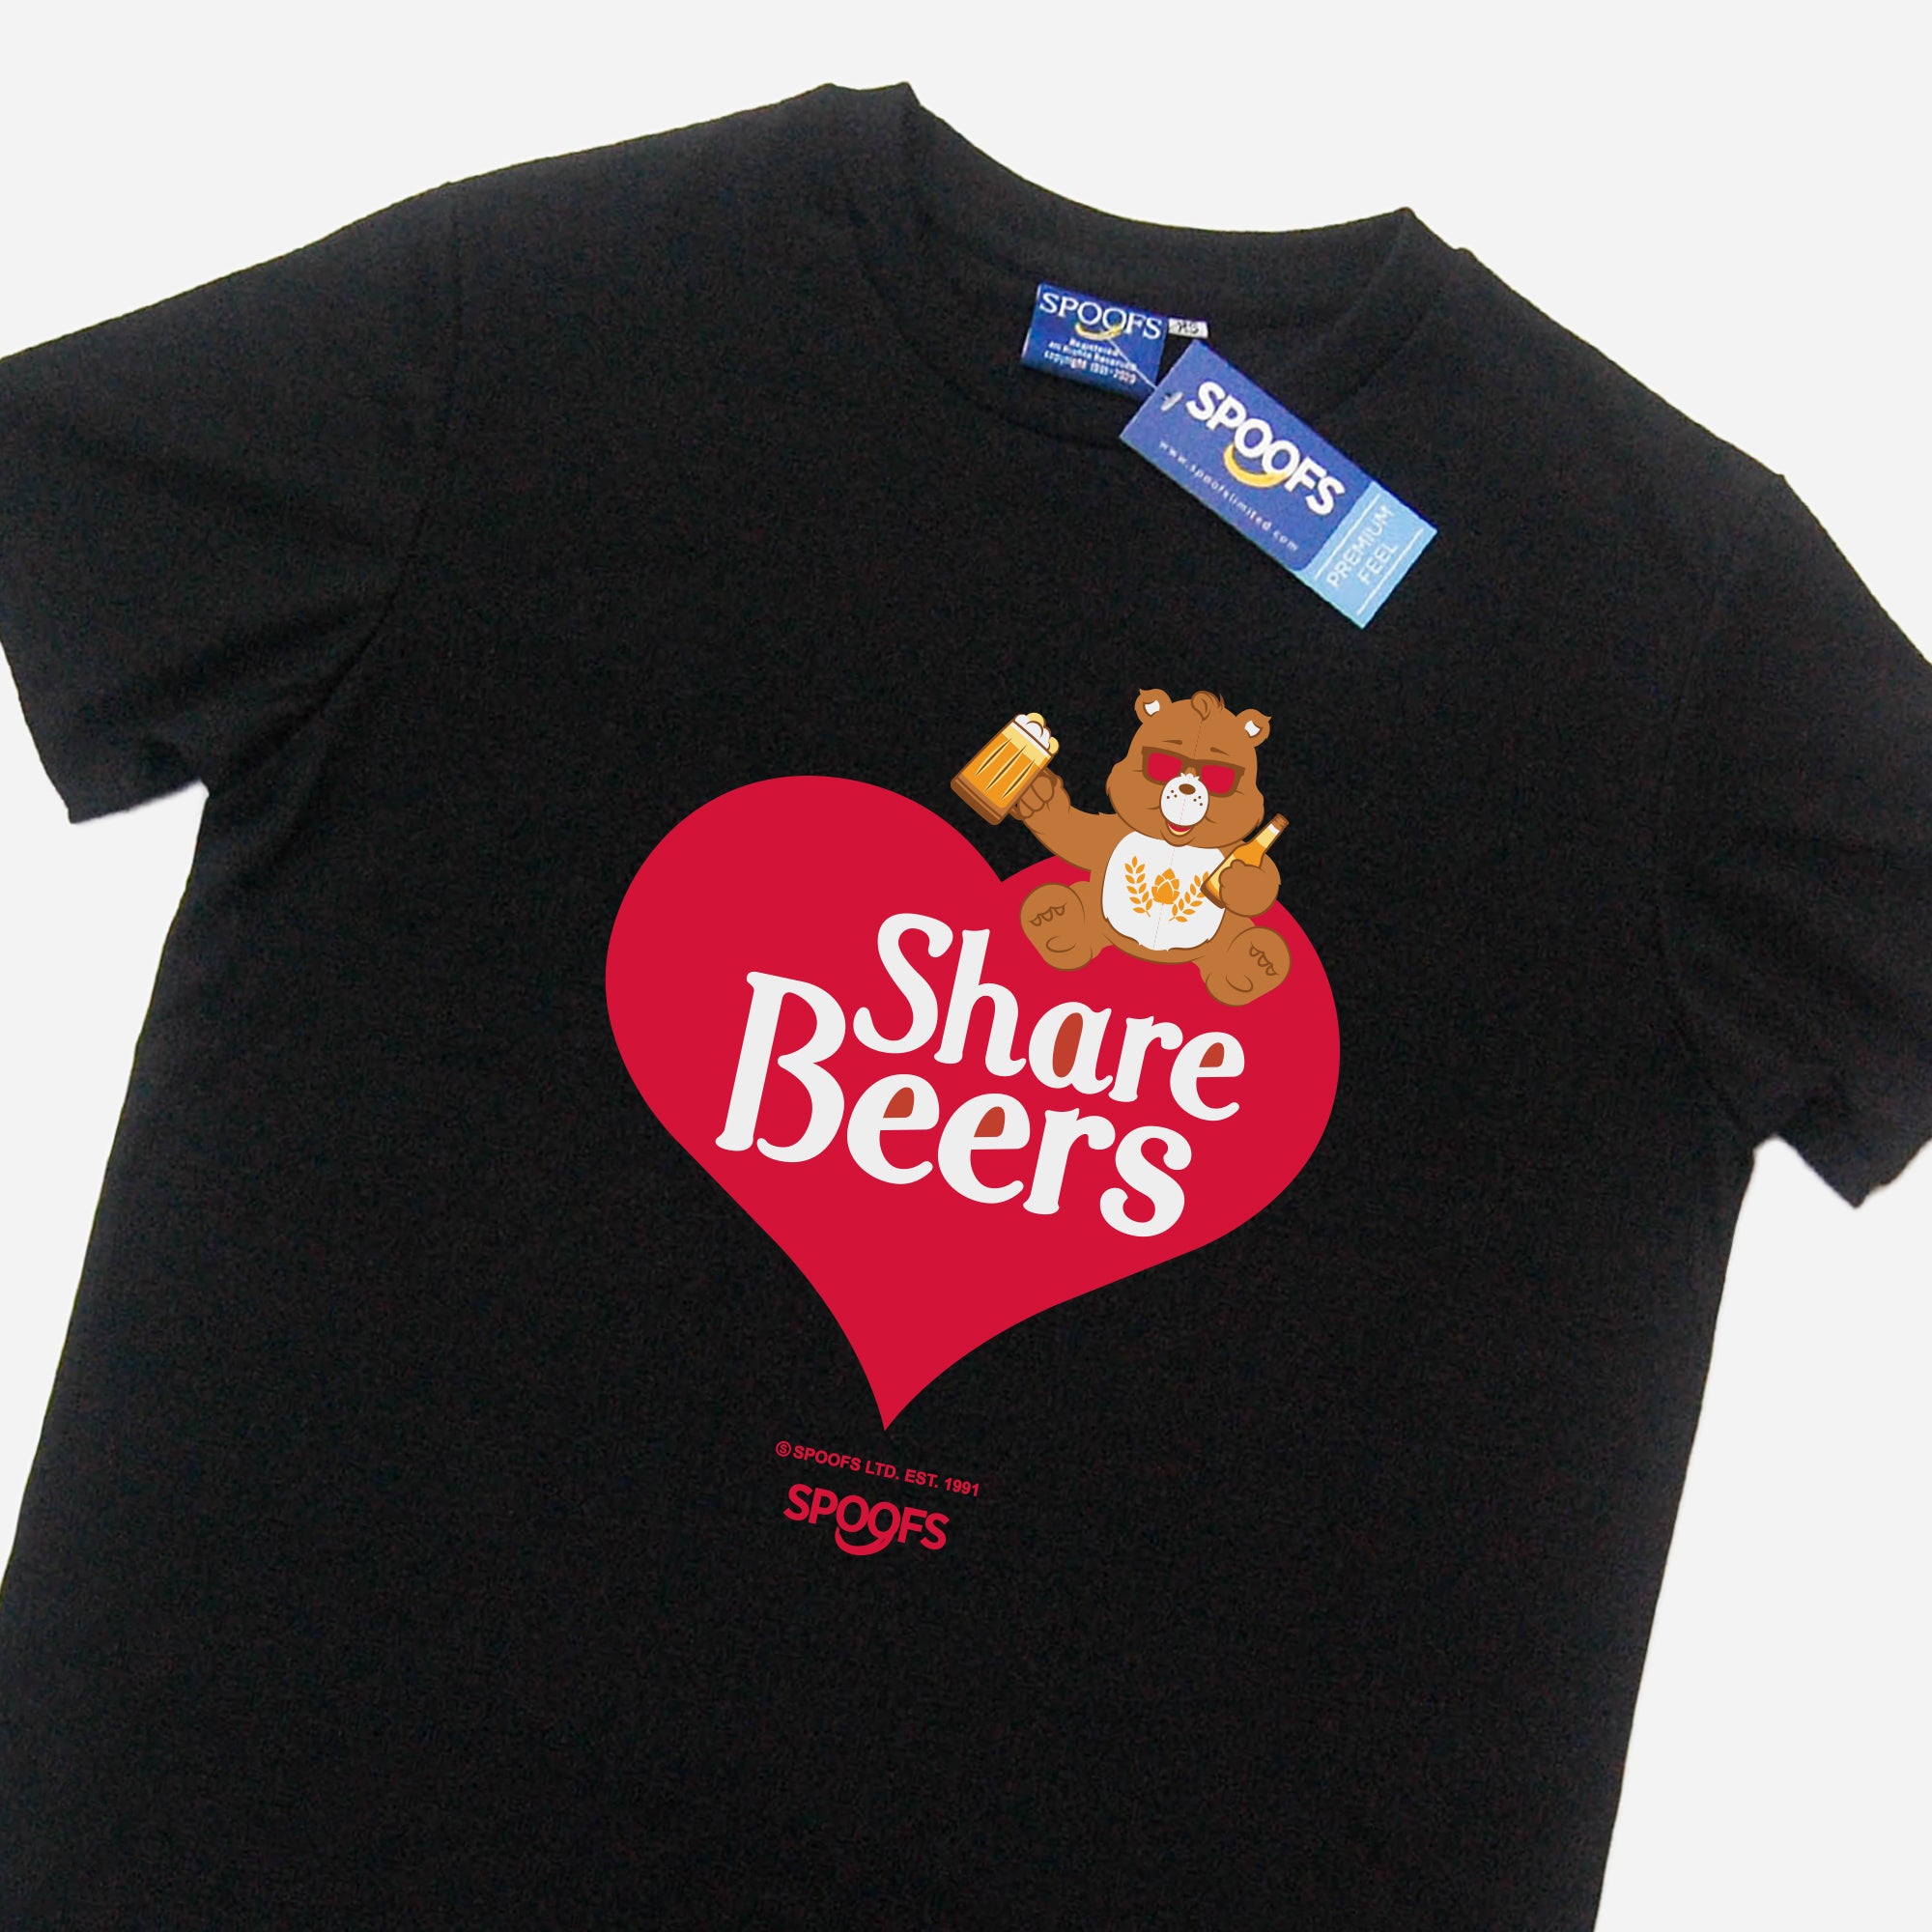 Share Beers (Black)